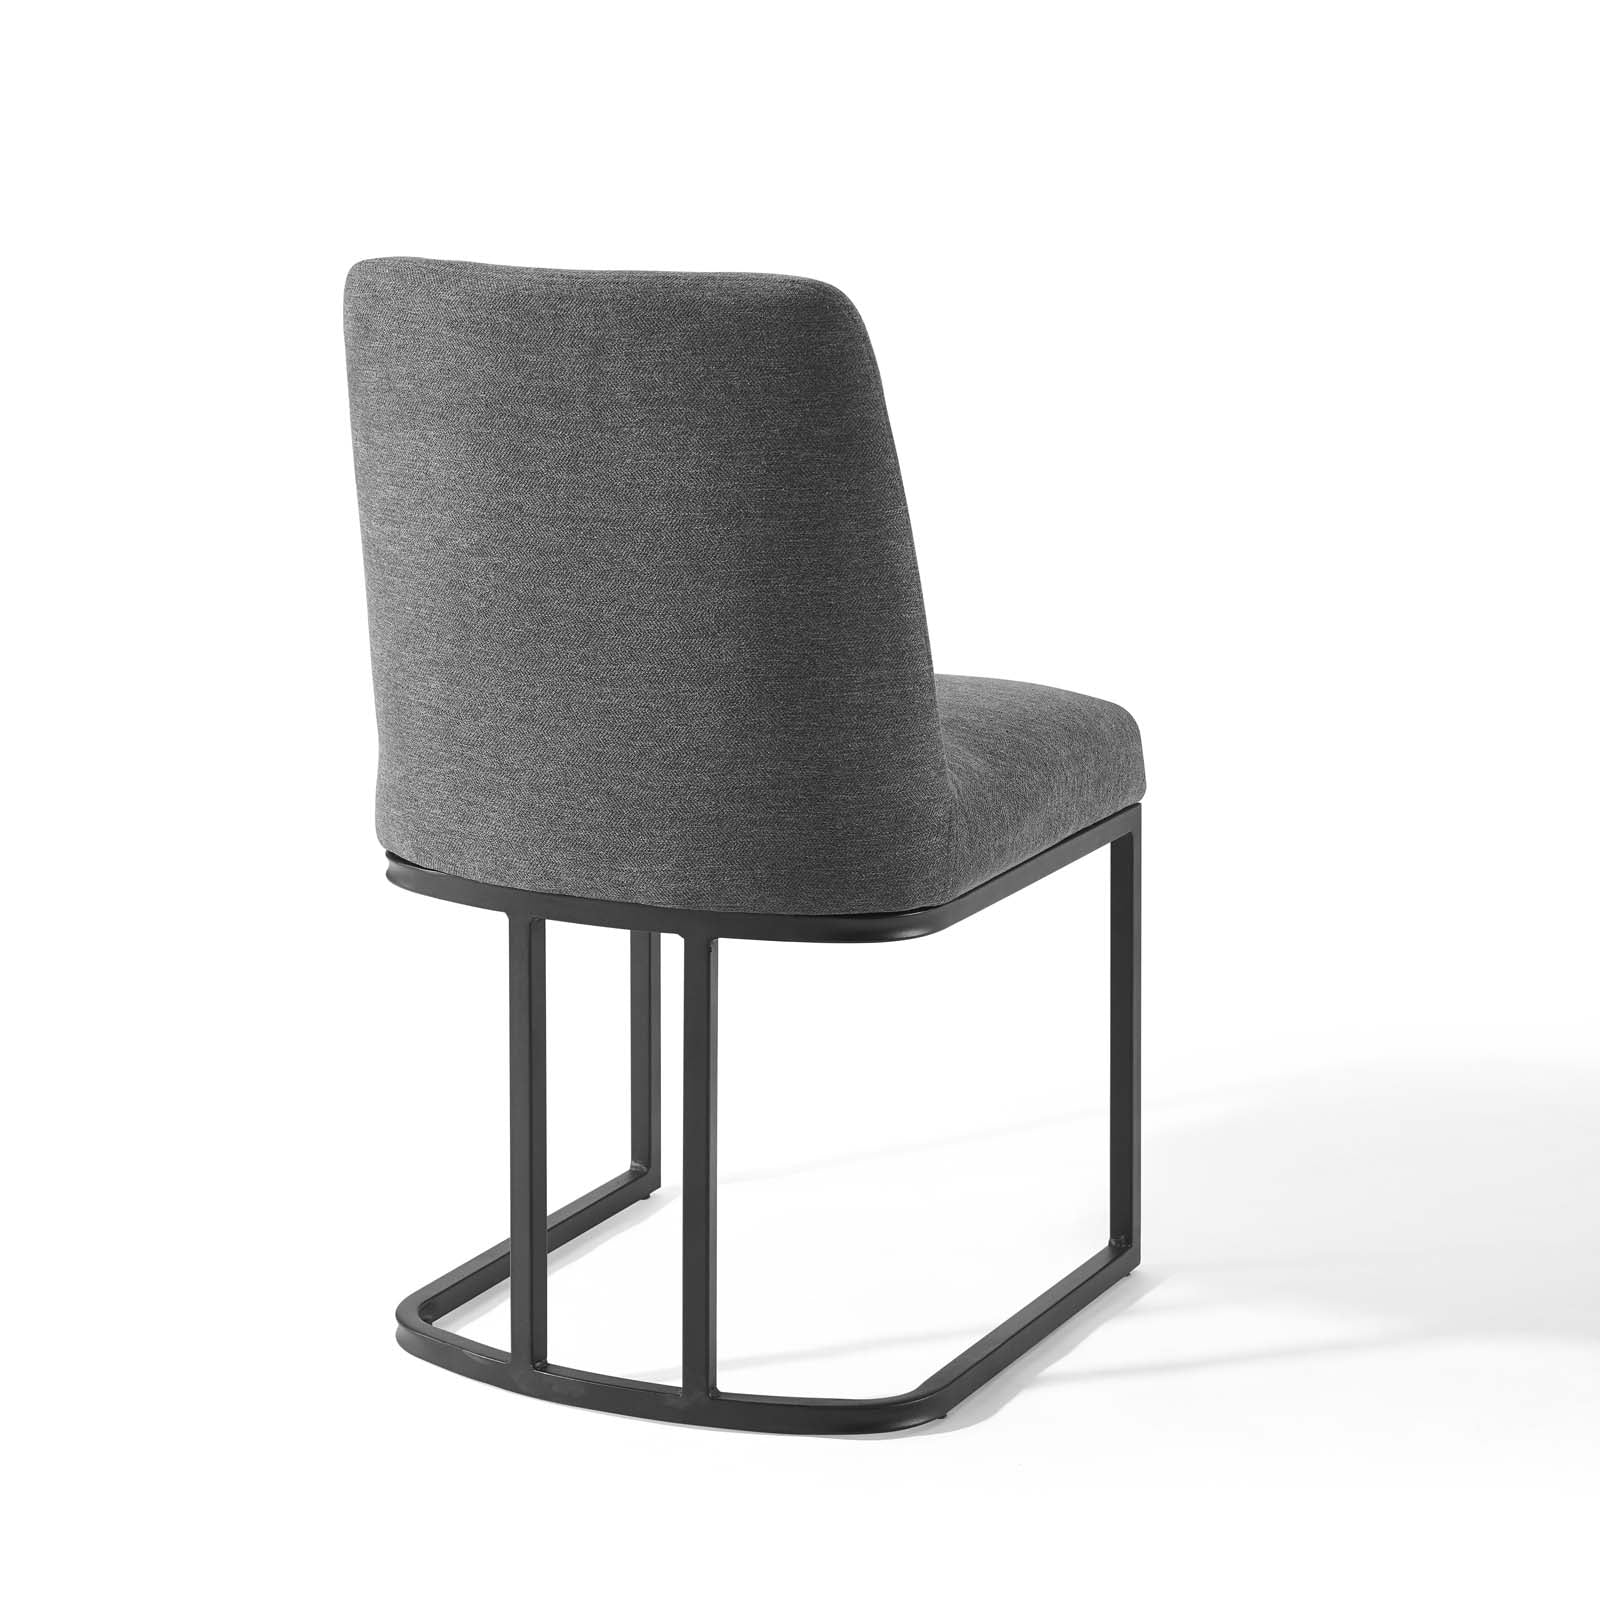 Modway Dining Chairs - Amplify Sled Base Upholstered Fabric Dining Side Chair Black Charcoal